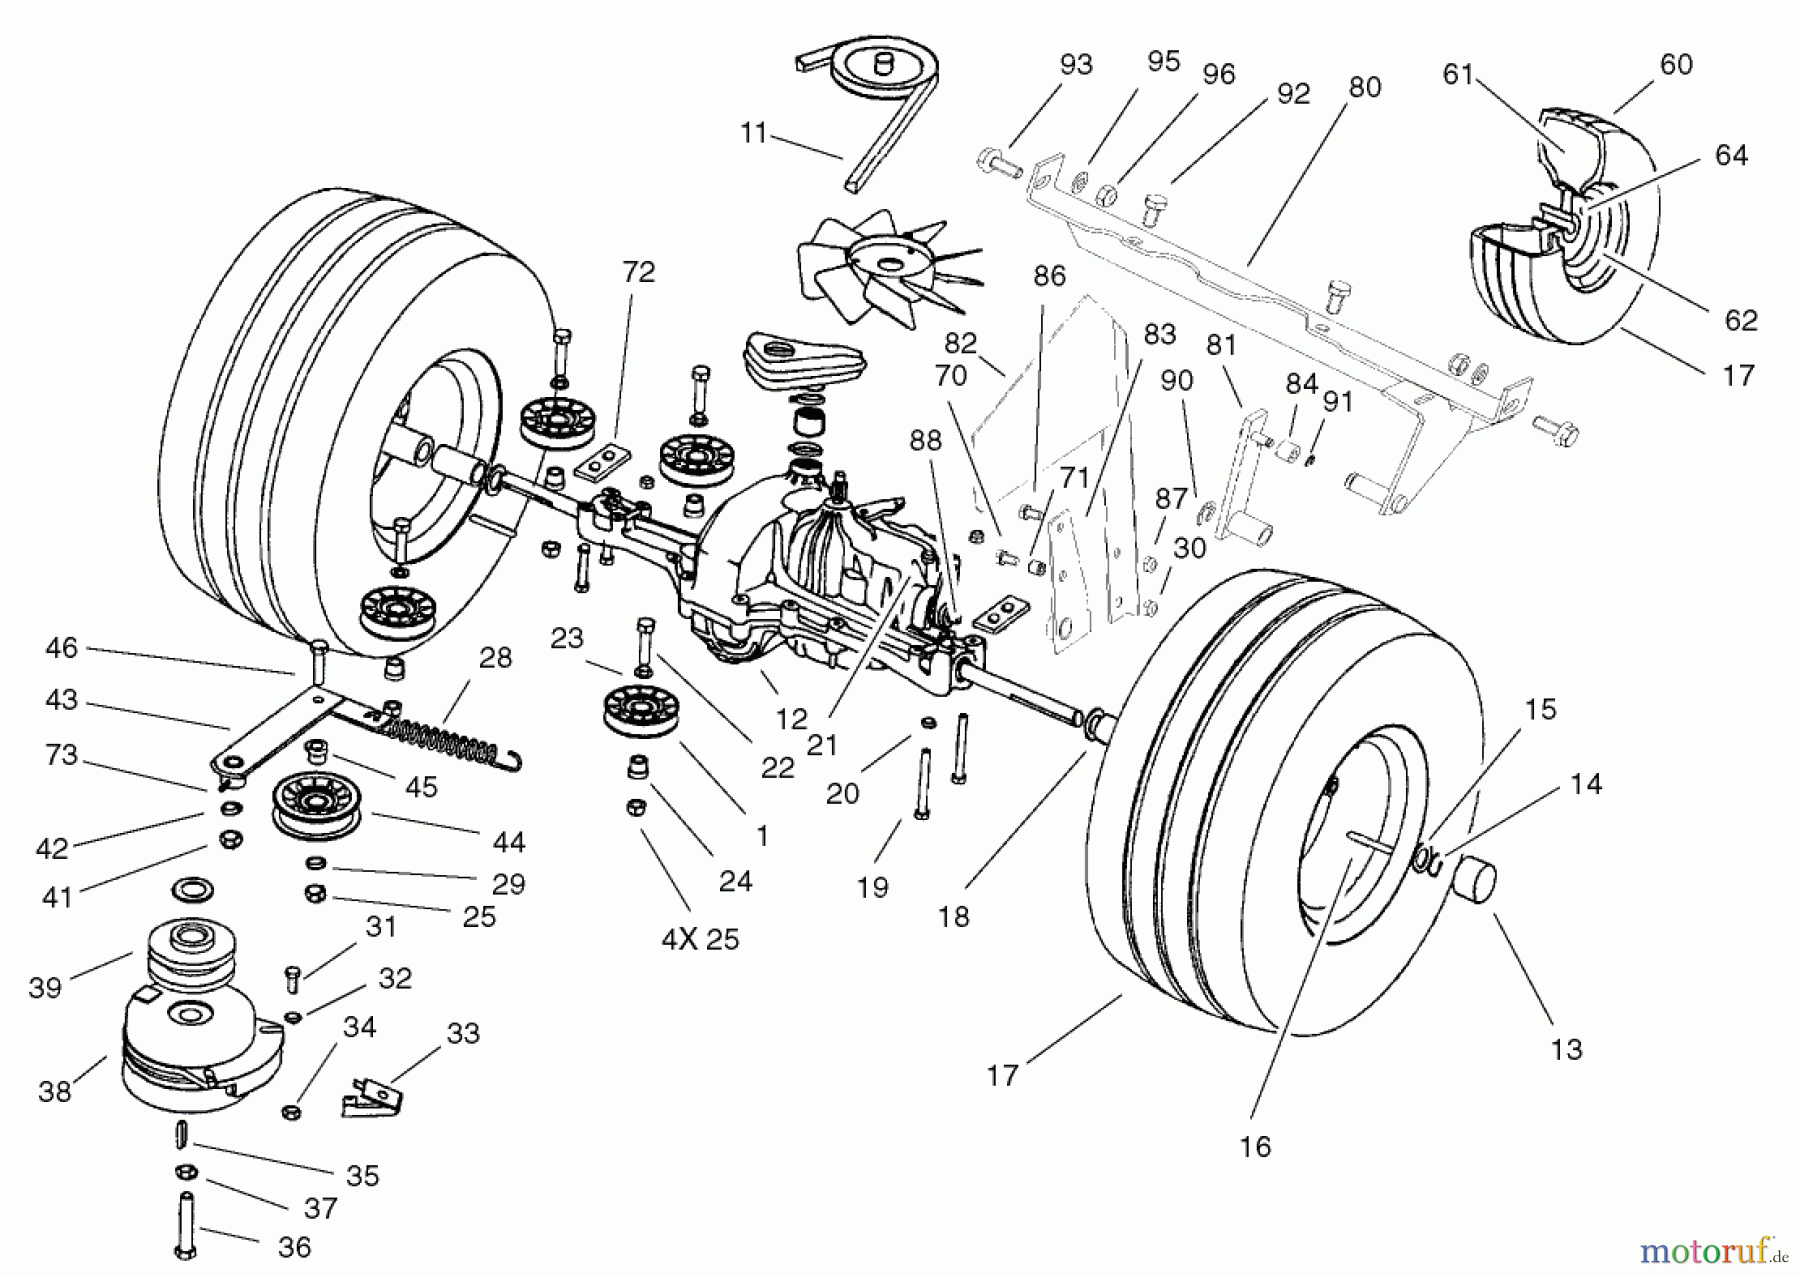  Toro Neu Mowers, Lawn & Garden Tractor Seite 1 74590 (190-DH) - Toro 190-DH Lawn Tractor, 2002 (220000001-220999999) TRANSMISSION DRIVE ASSEMBLY